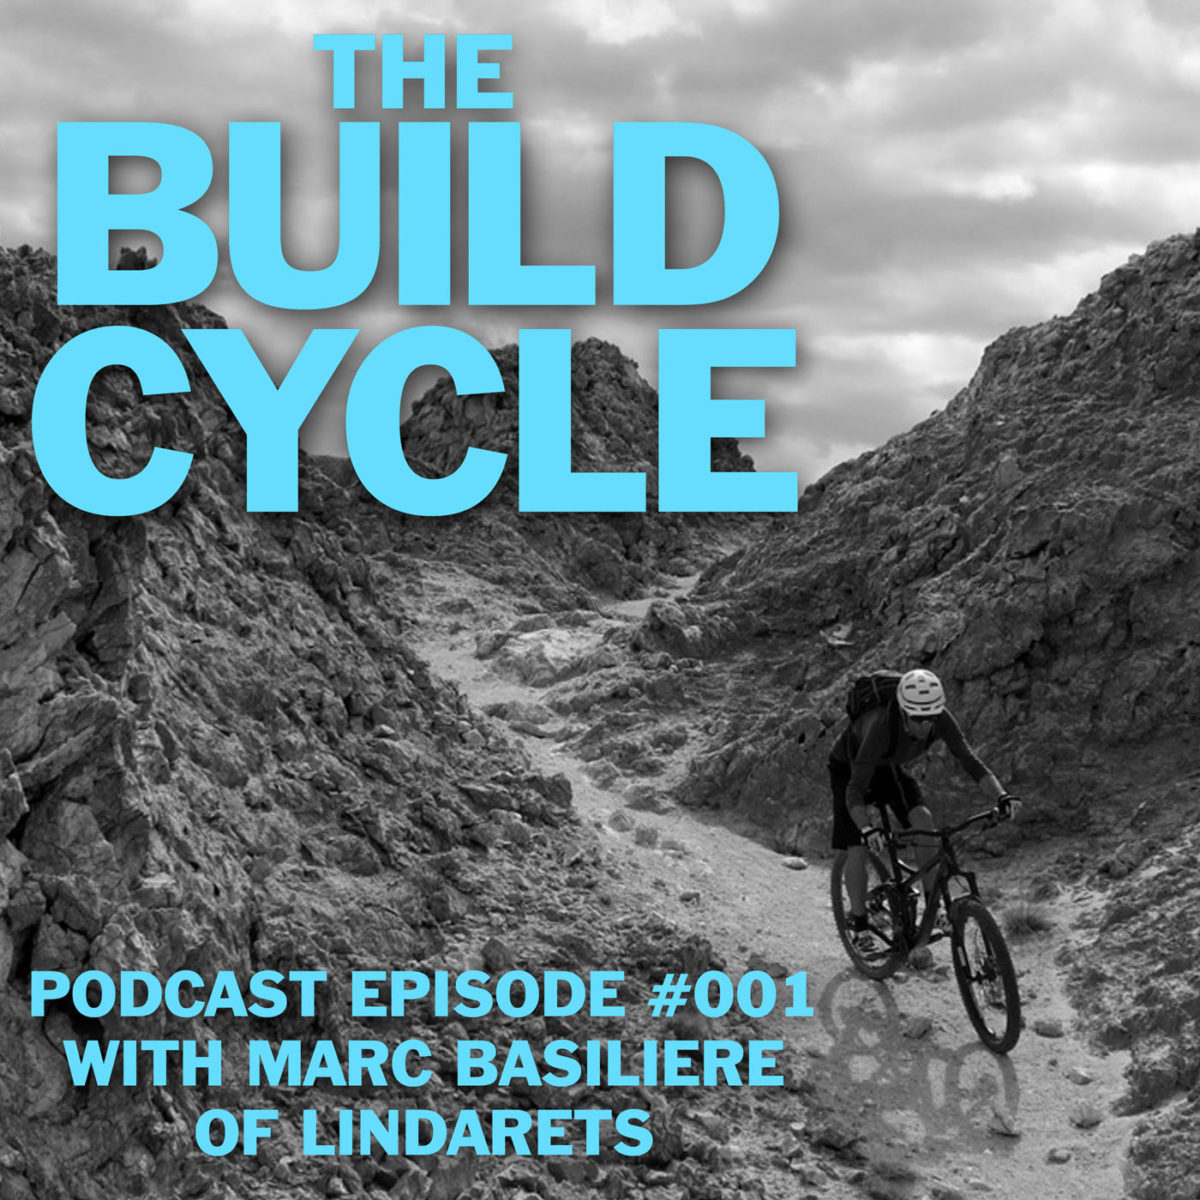 The Build Cycle Podcast is LIVE!!!